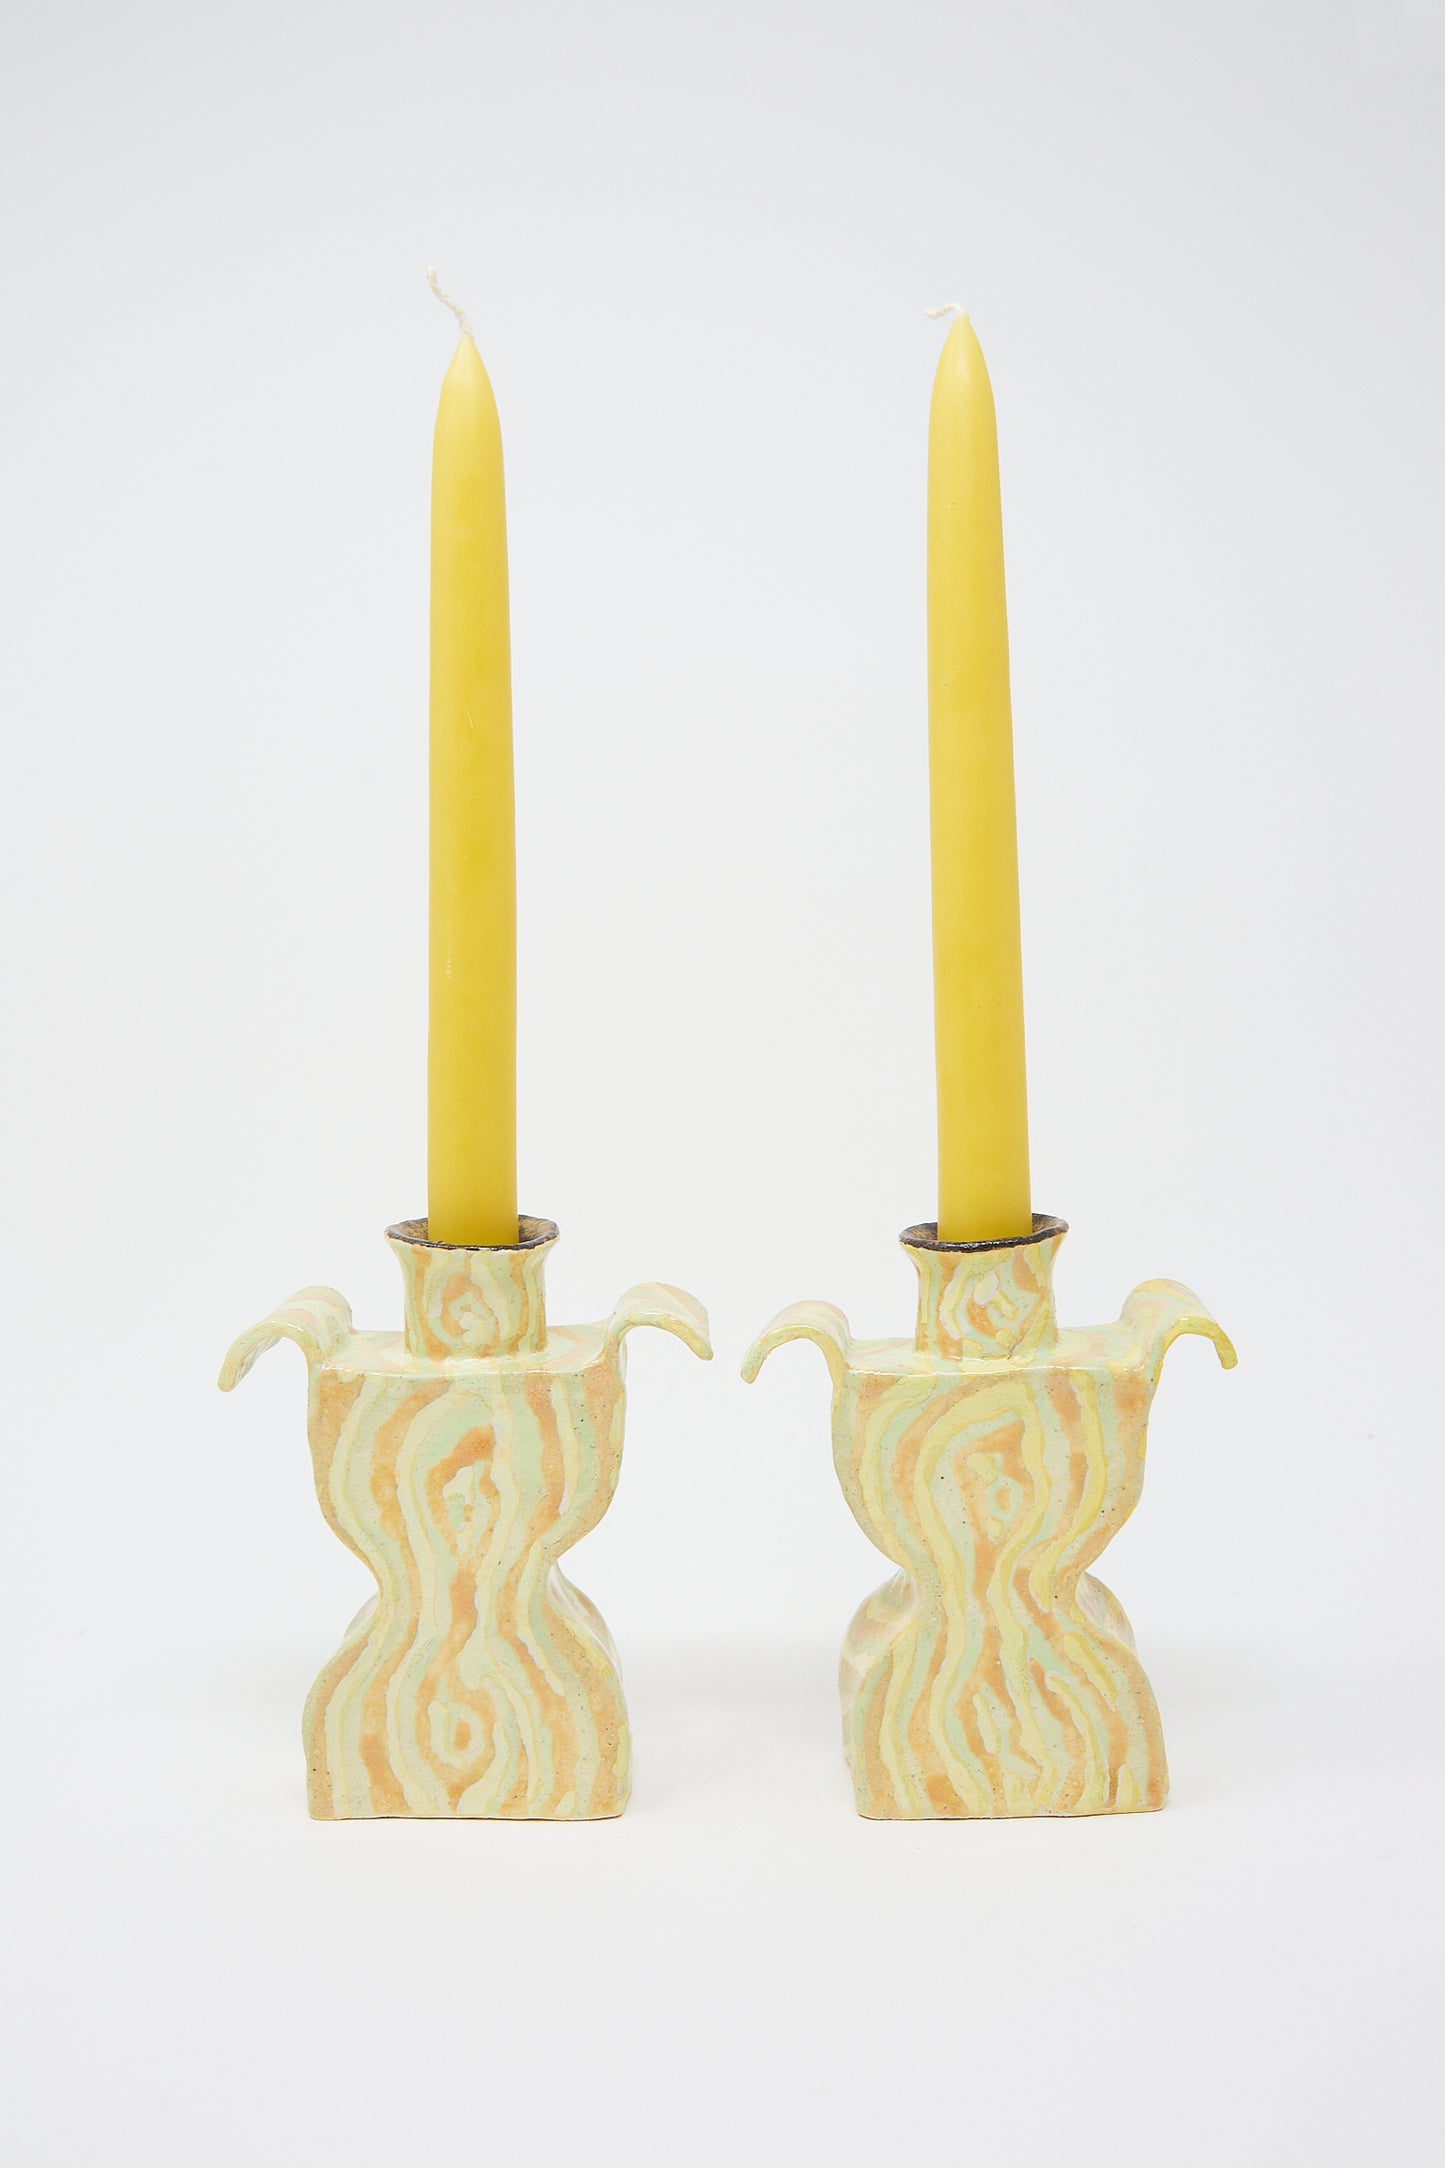 Two Woodgrain Candlesticks Pair standing in ornate, handcrafted ceramic candle holders against a white background. (Brand Name: Pearce Williams)